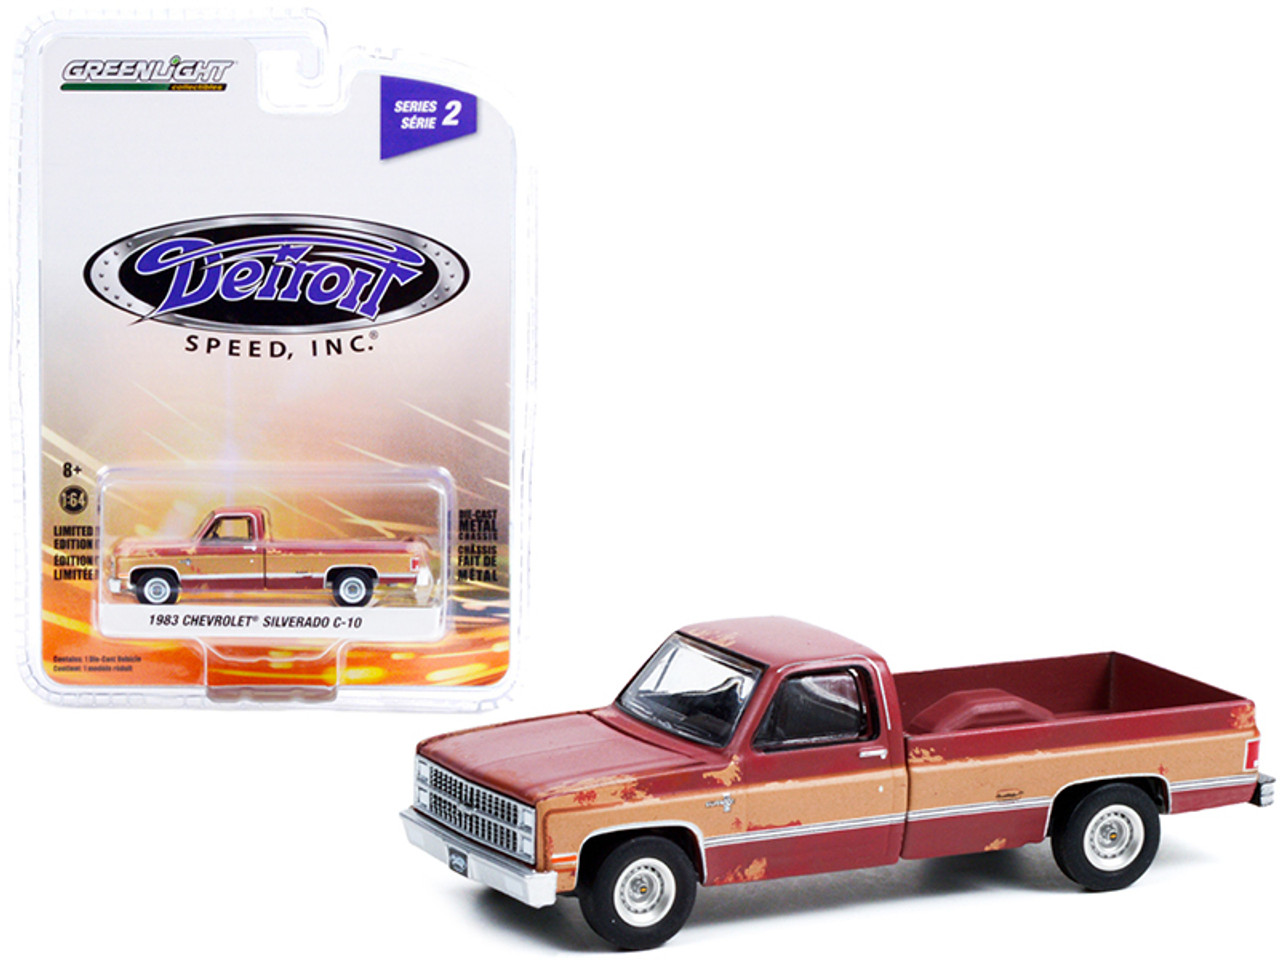 Greenlight Collectible 1983 Chevy Silverado C-10 Pickup Truck Burgundy with Tan Sides (Weathered) Detroit Speed,Series 2 164 Diecast Model Car